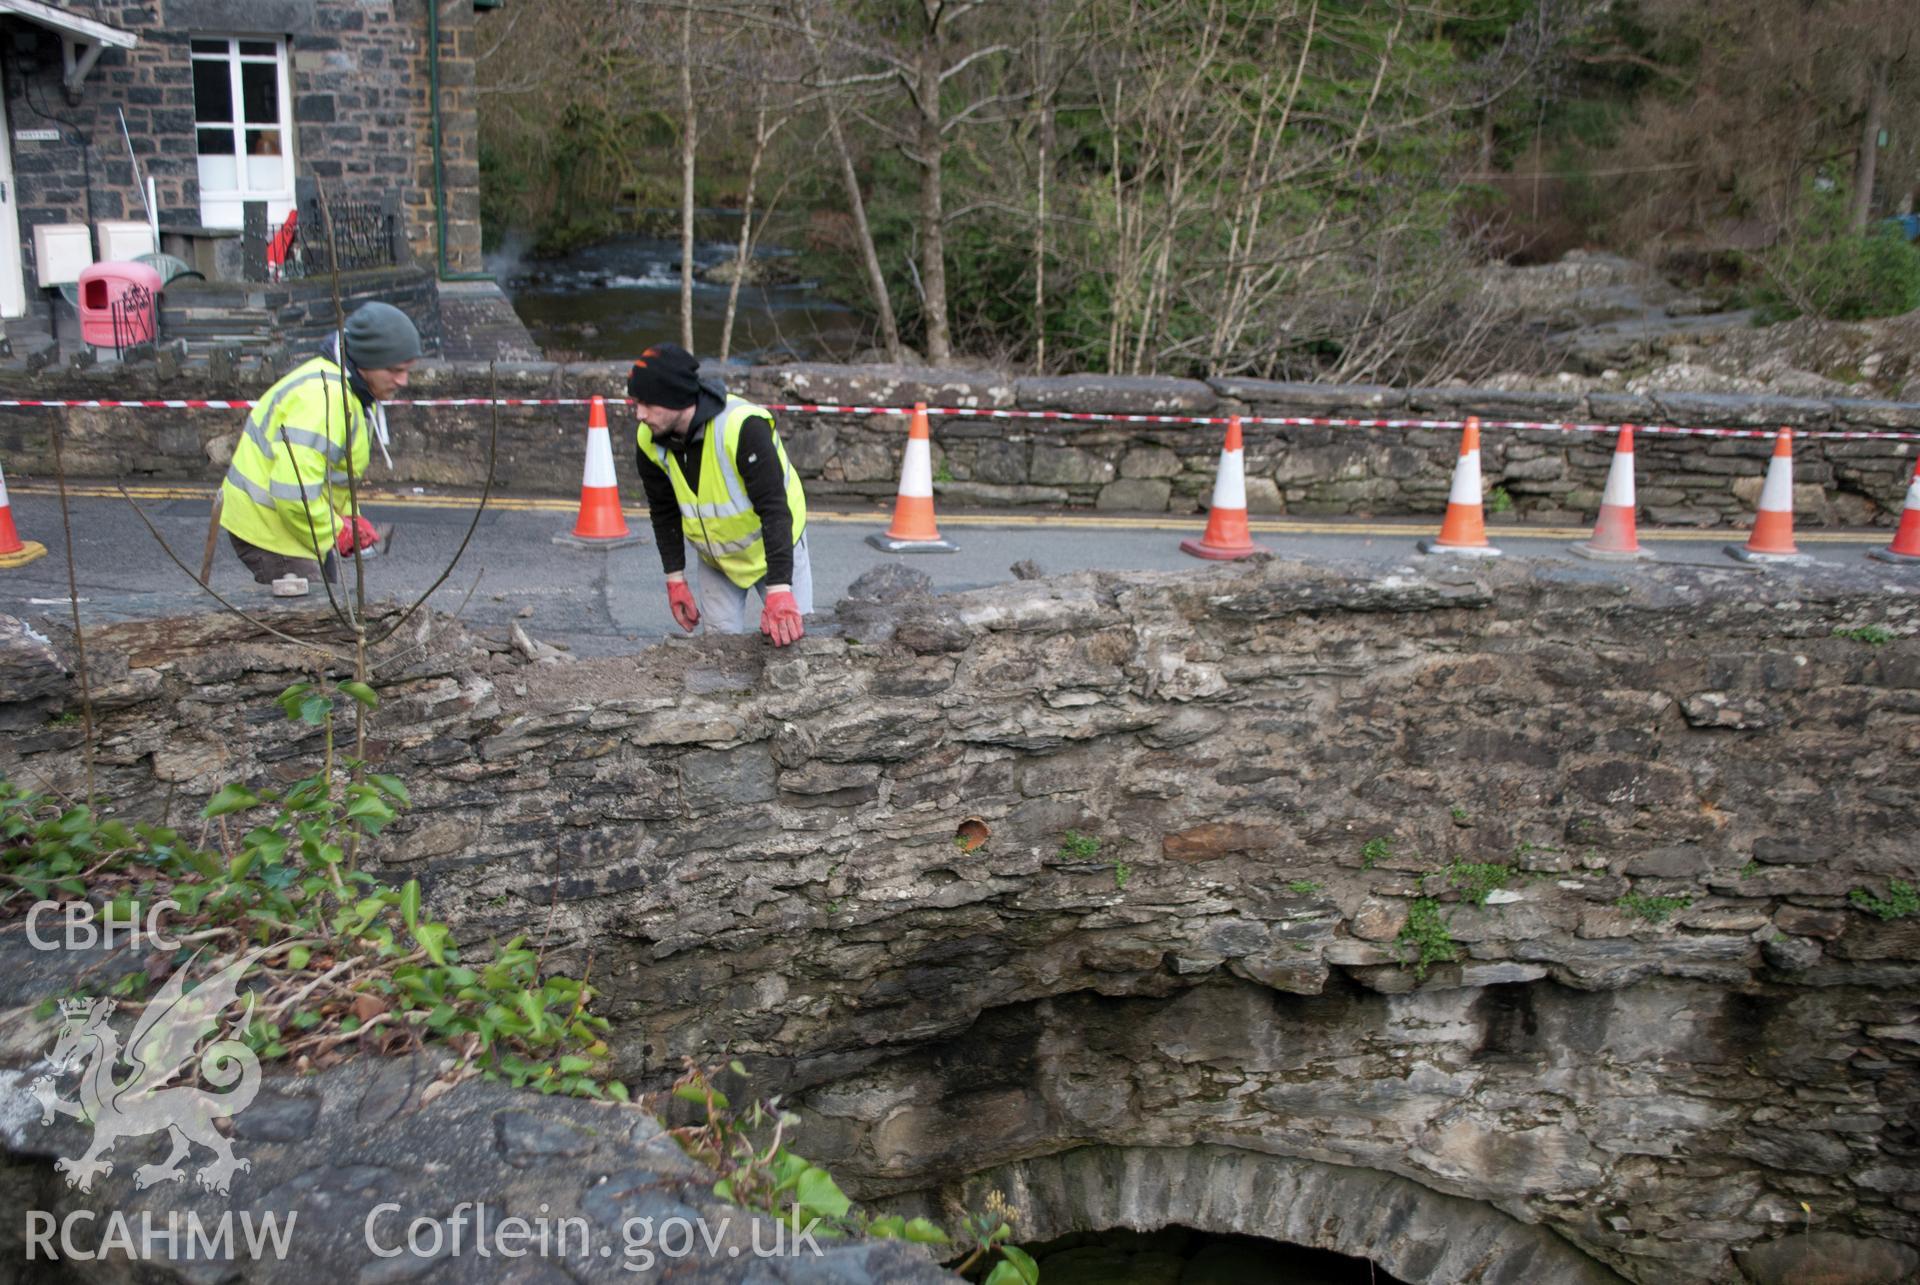 View of parapet wall demolition viewed from the south east. Digital photograph taken for Archaeological Watching Brief at Pont y Pair, Betws y Coed, 2019. Gwynedd Archaeological Trust Project no. G2587.